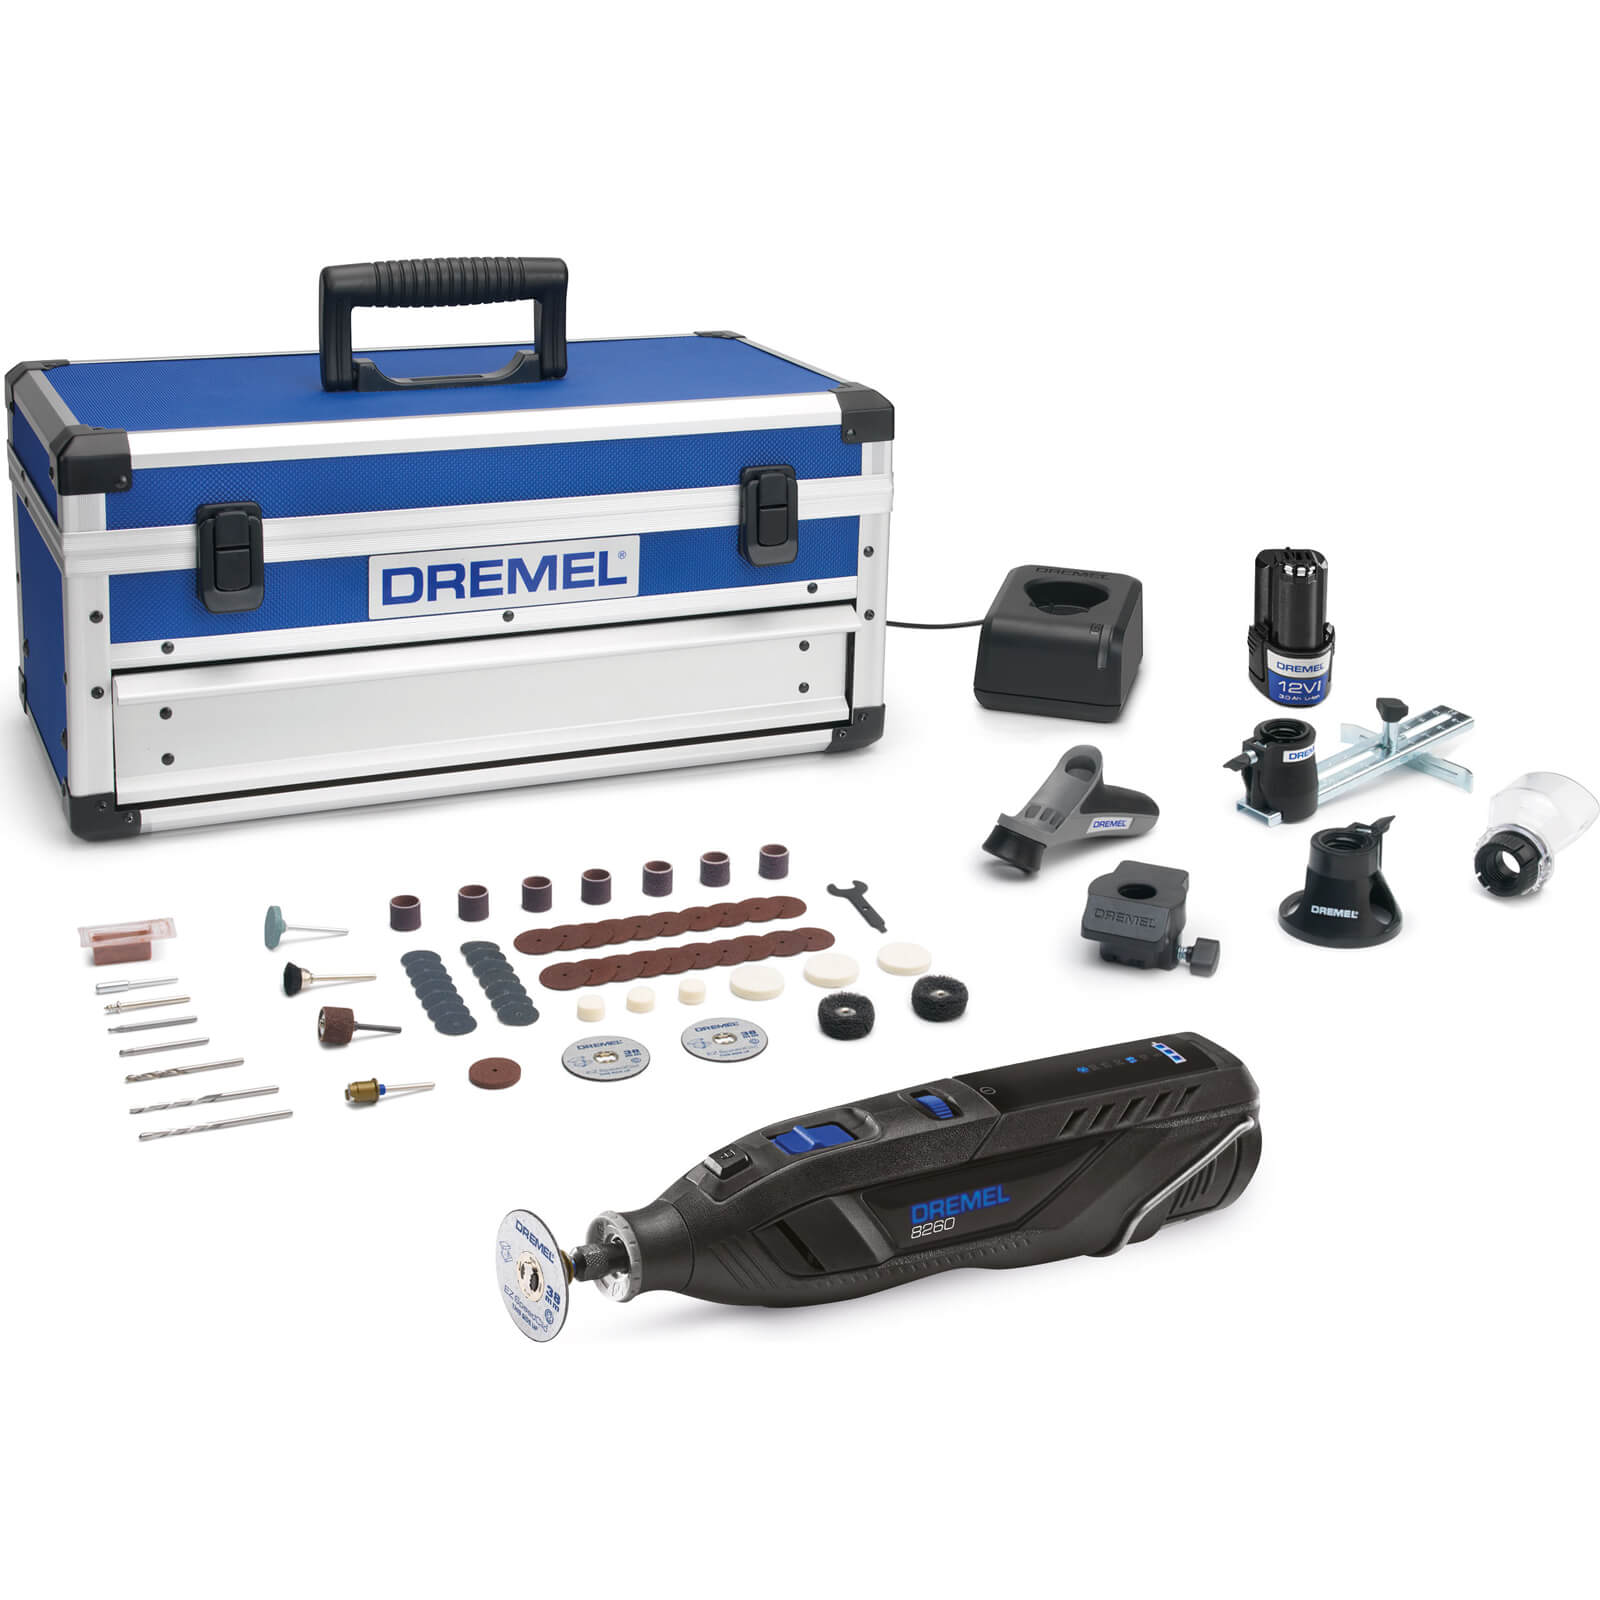 Image of Dremel 8260 12v Cordless Brushless Rotary Multi Tool and 65 Accessory Platinum Kit 2 x 3ah Li-ion Charger Case